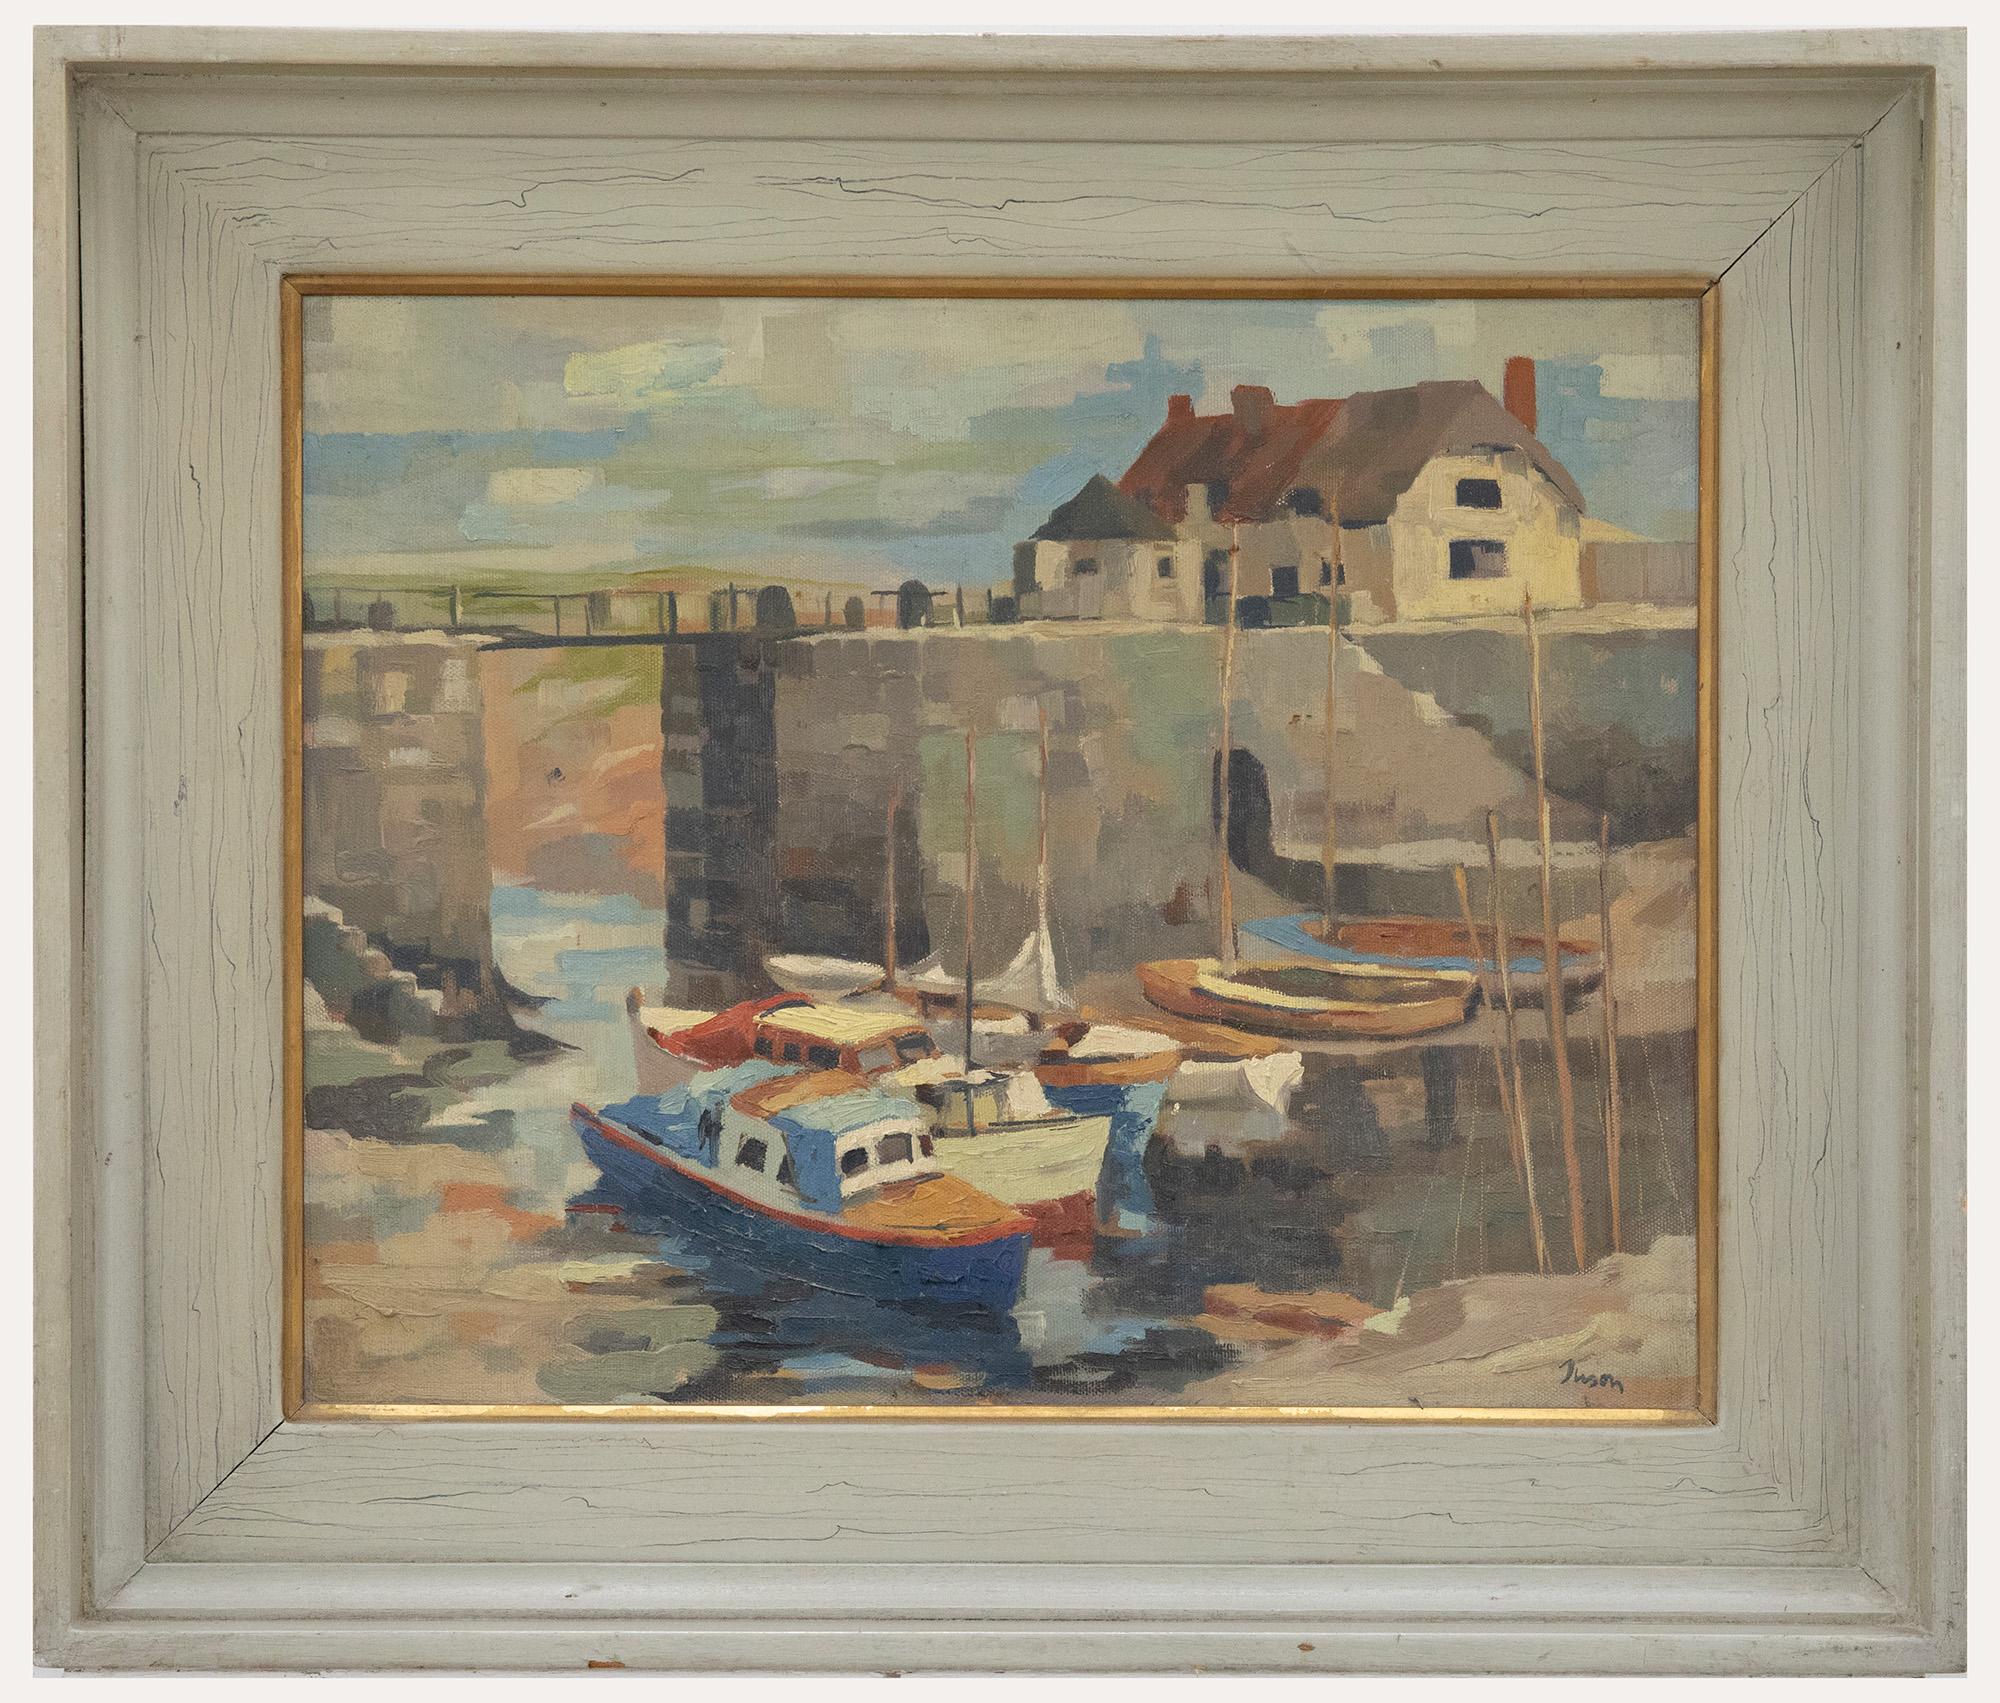 Unknown Figurative Painting - Tuson - Mid 20th Century Oil, The Harbour at Low Tide